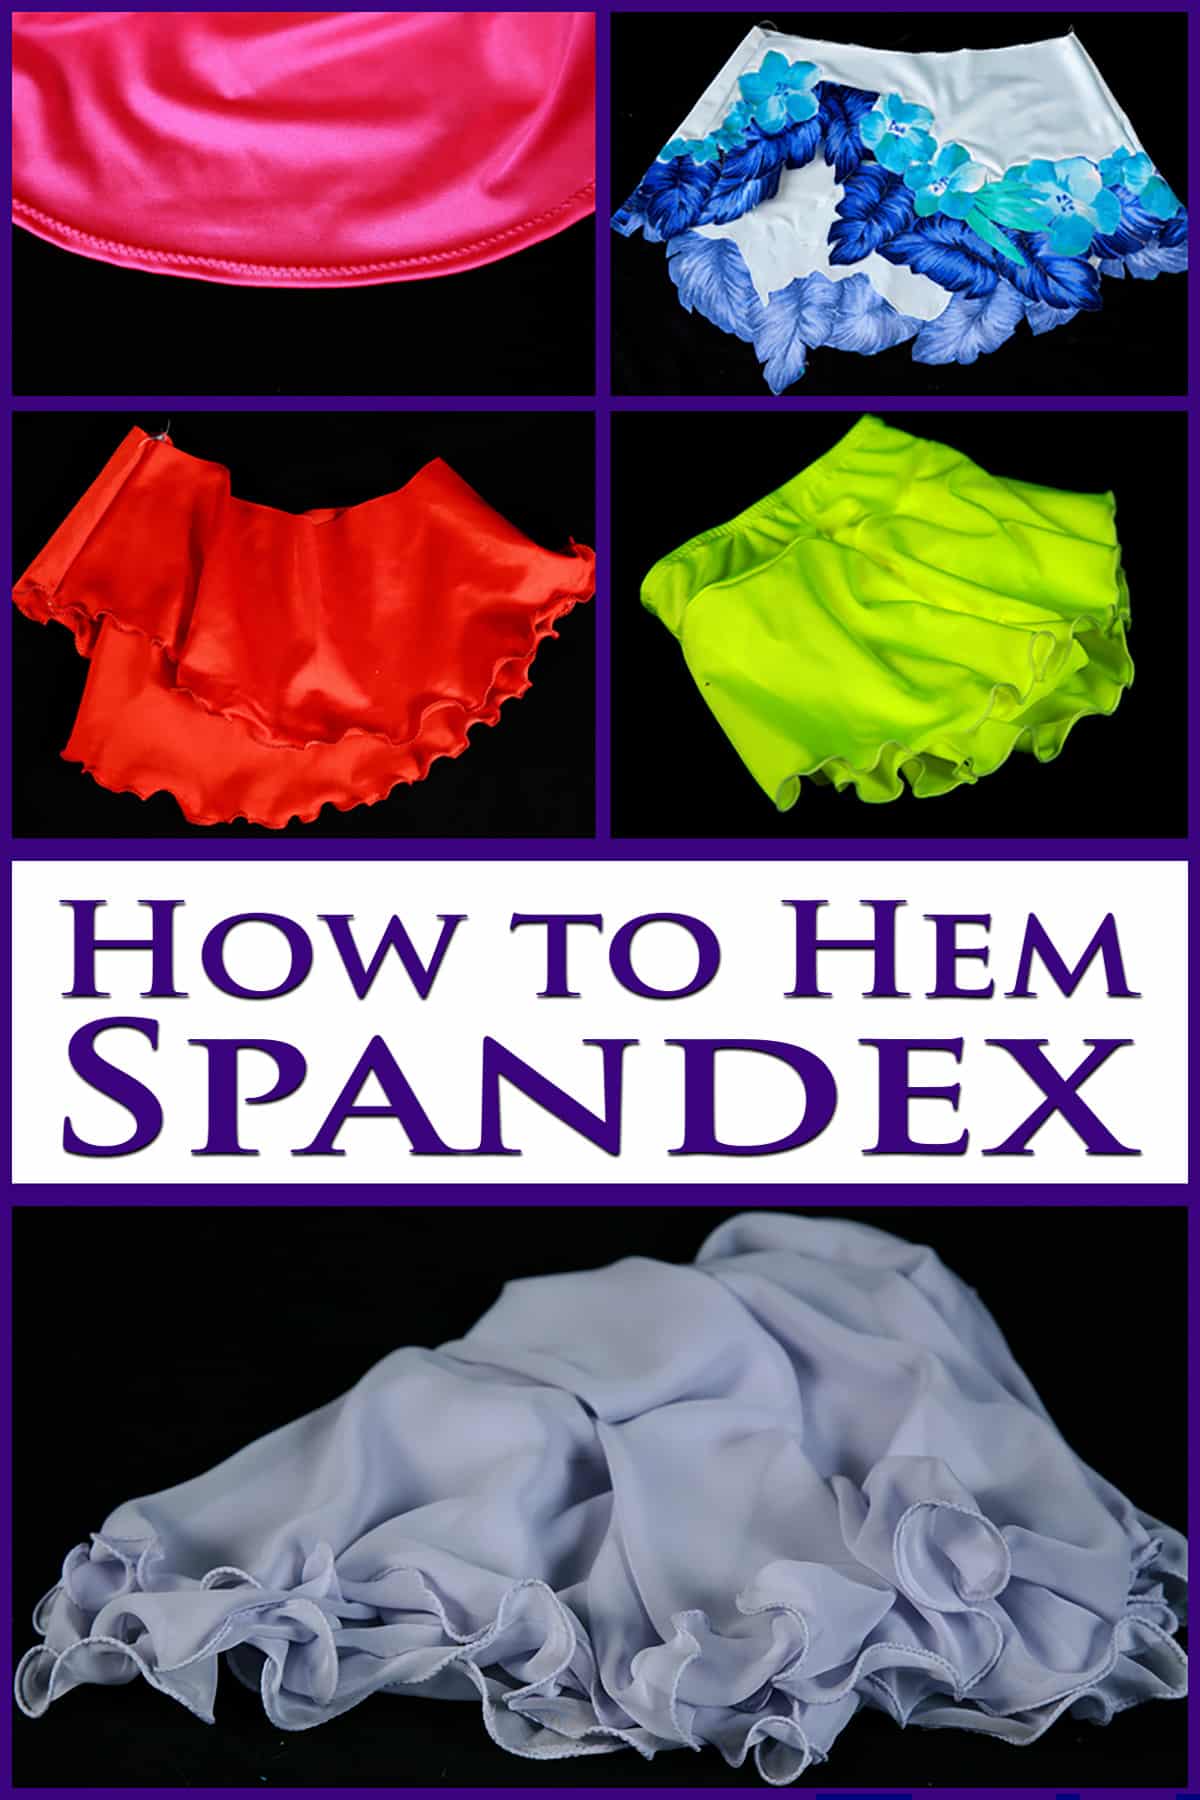 Several photos of figure skating skirts, with purple text that says how to sew spandex.